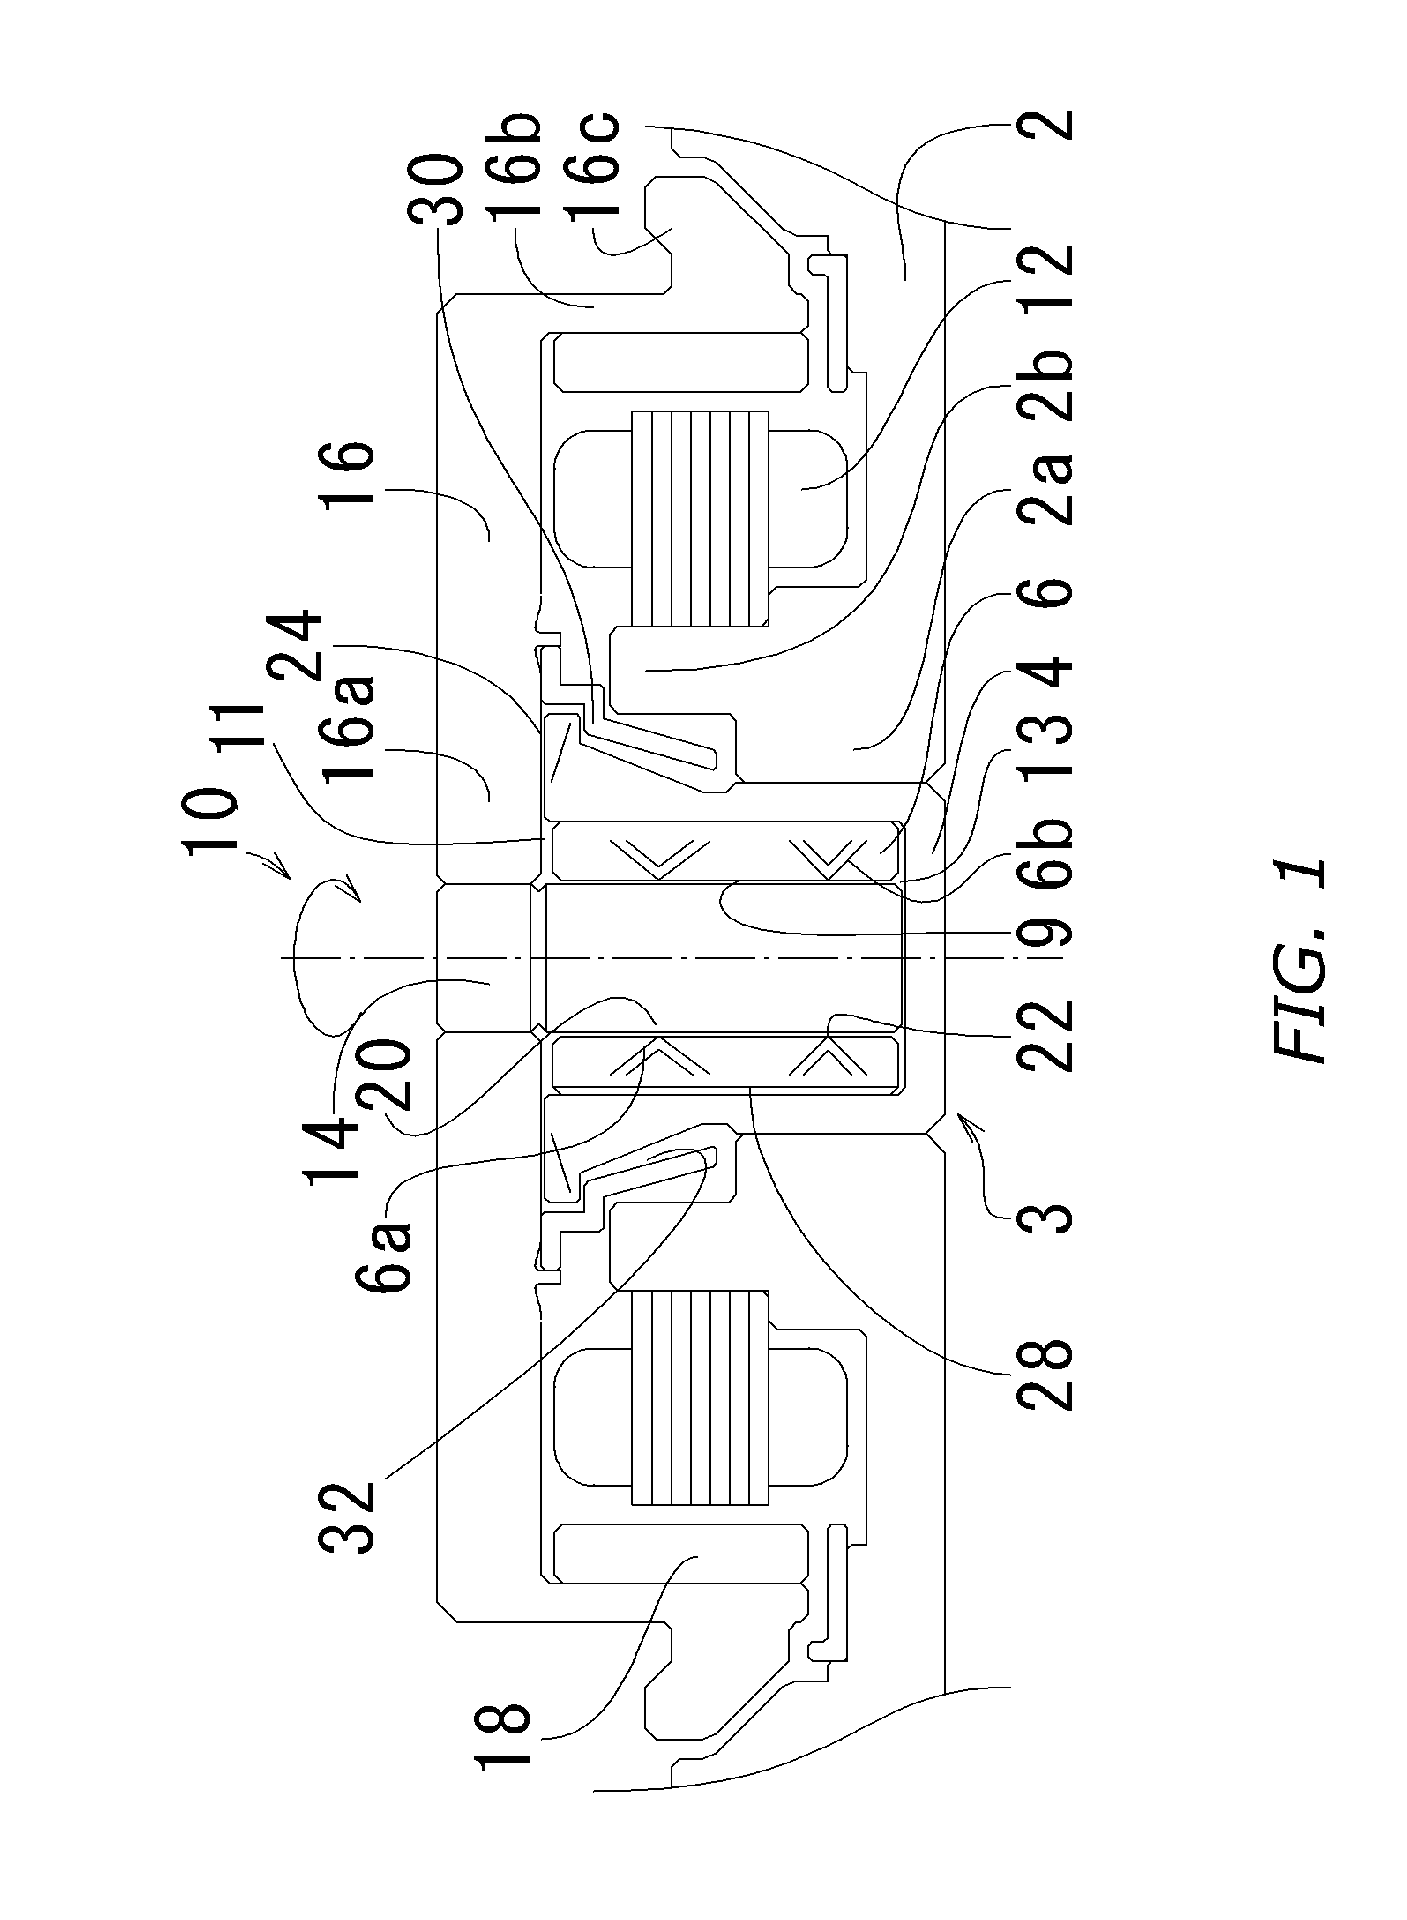 Fluid Dynamic Pressure Bearing, Spindle Motor Provided with Fluid Dynamic Pressure Bearing, and Recording Disk Drive Device Provided with Spindle Motor